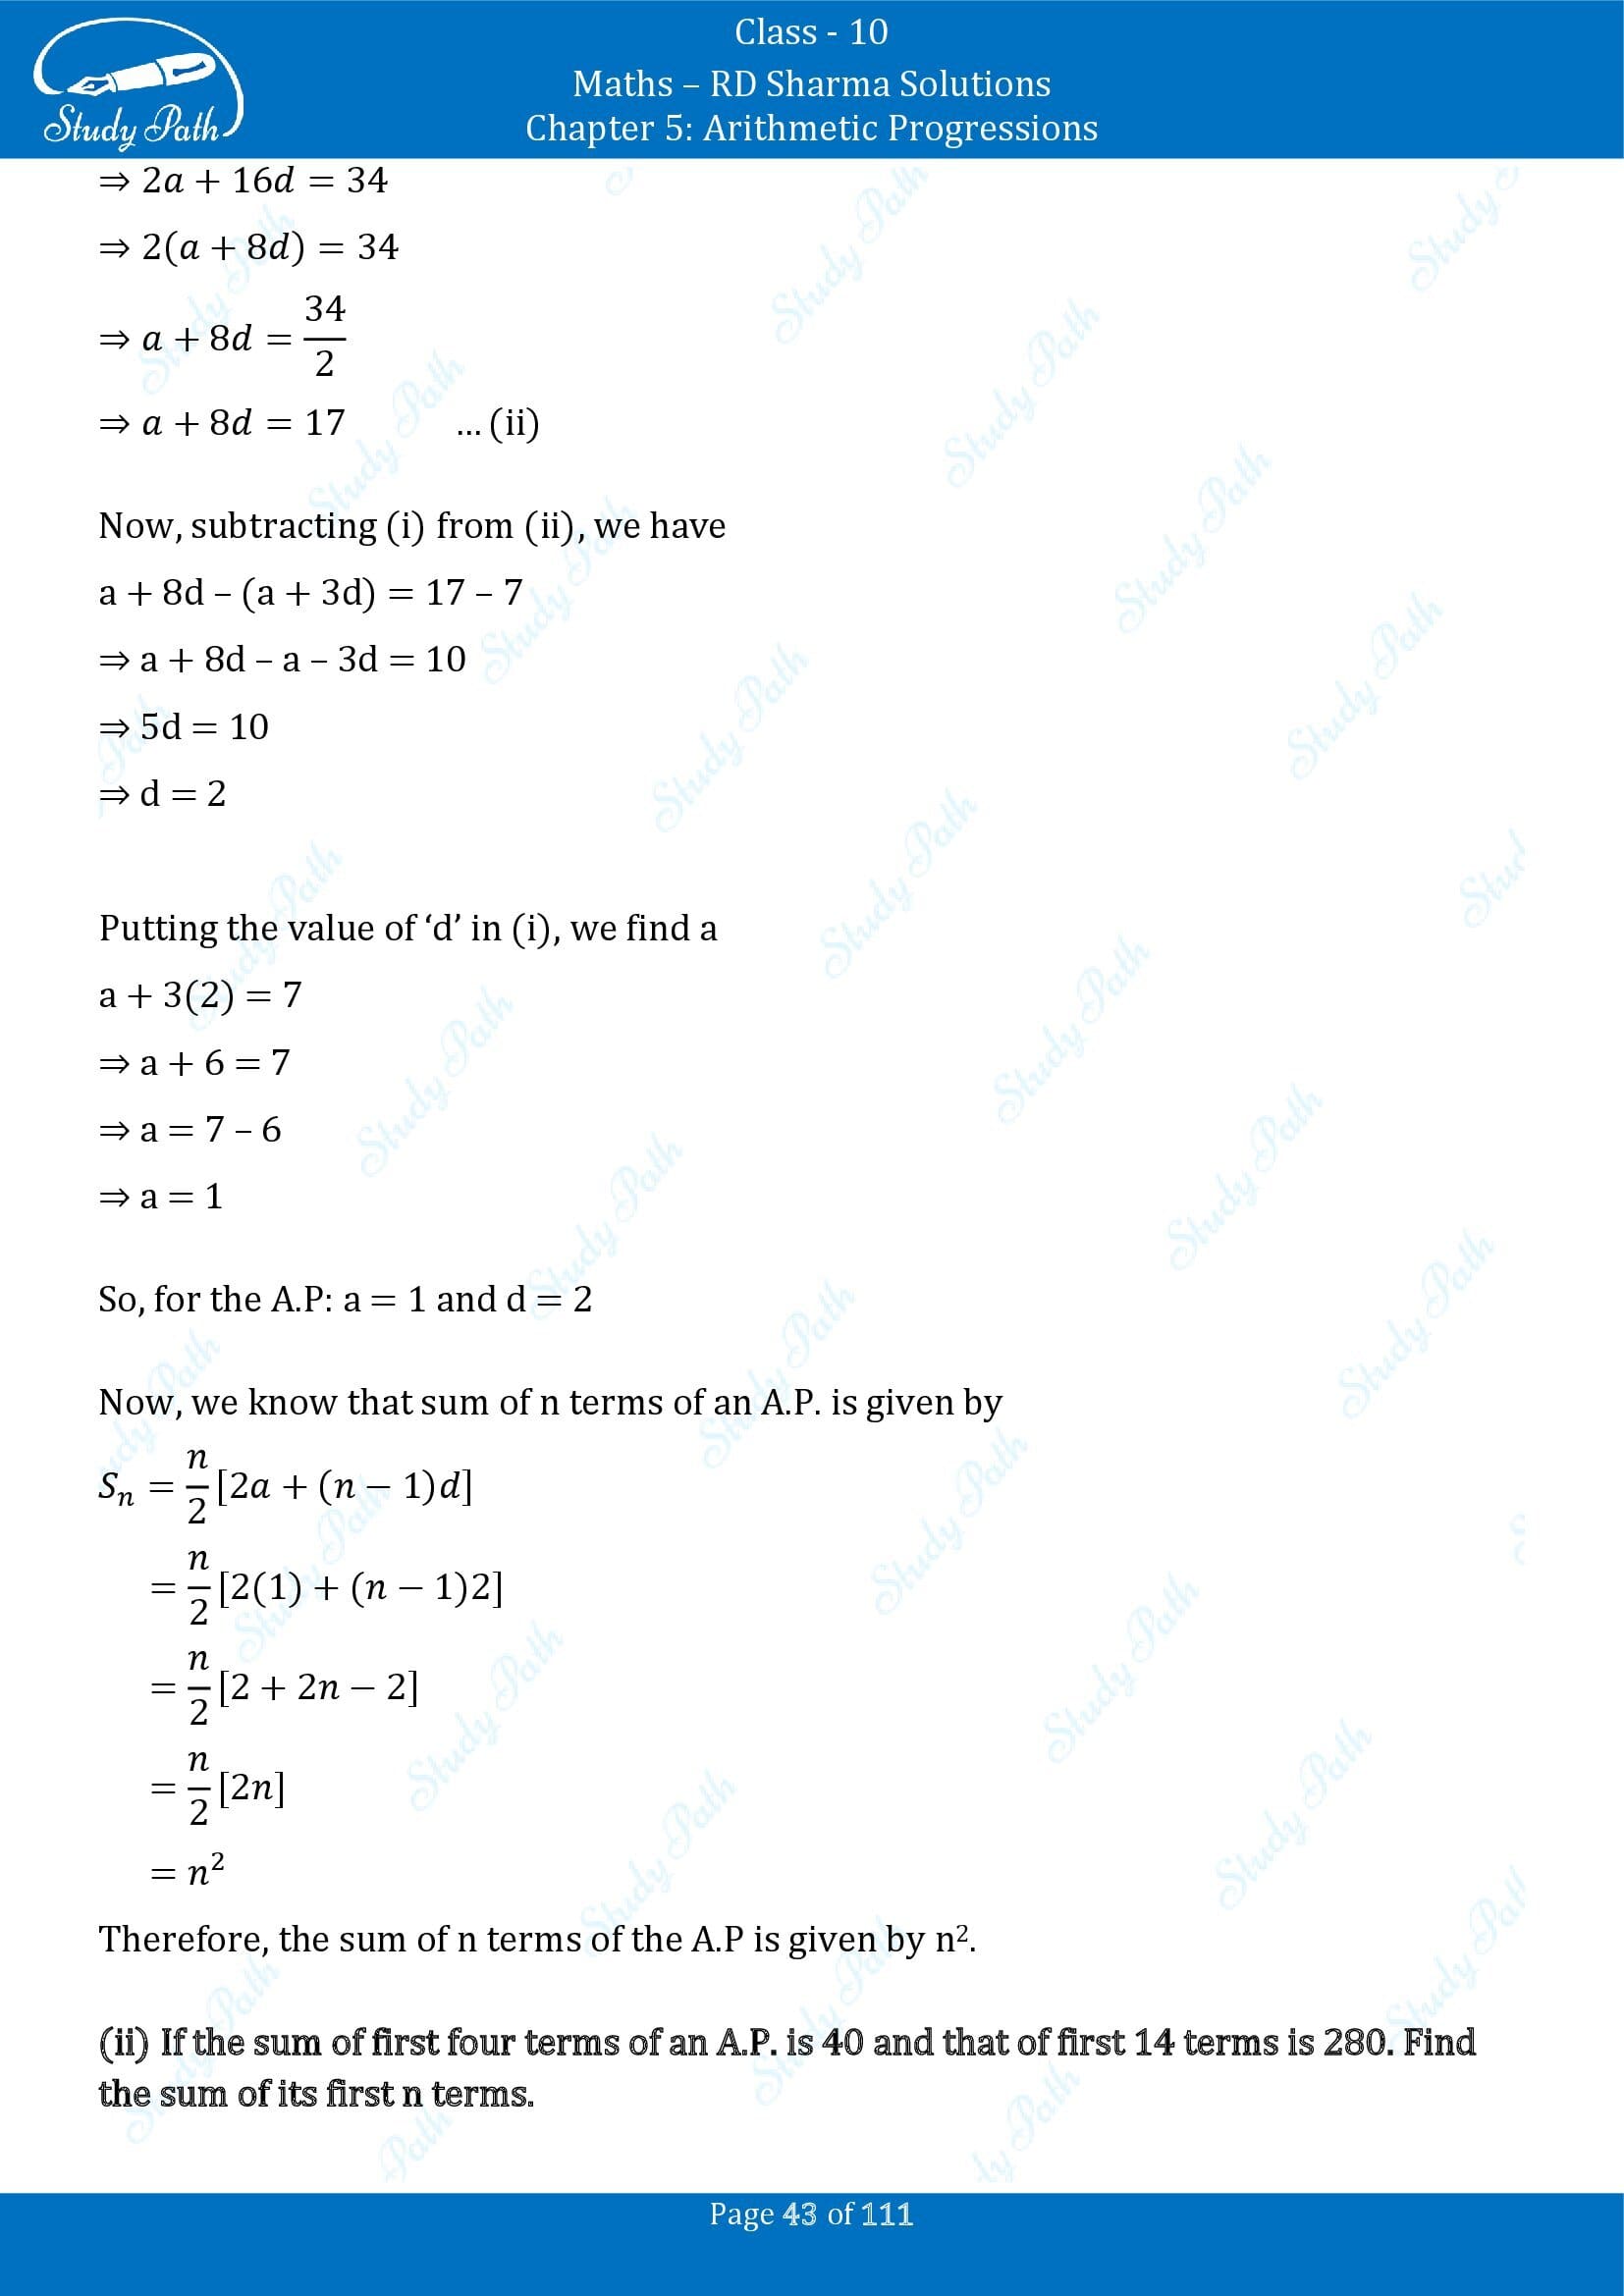 RD Sharma Solutions Class 10 Chapter 5 Arithmetic Progressions Exercise 5.6 00043